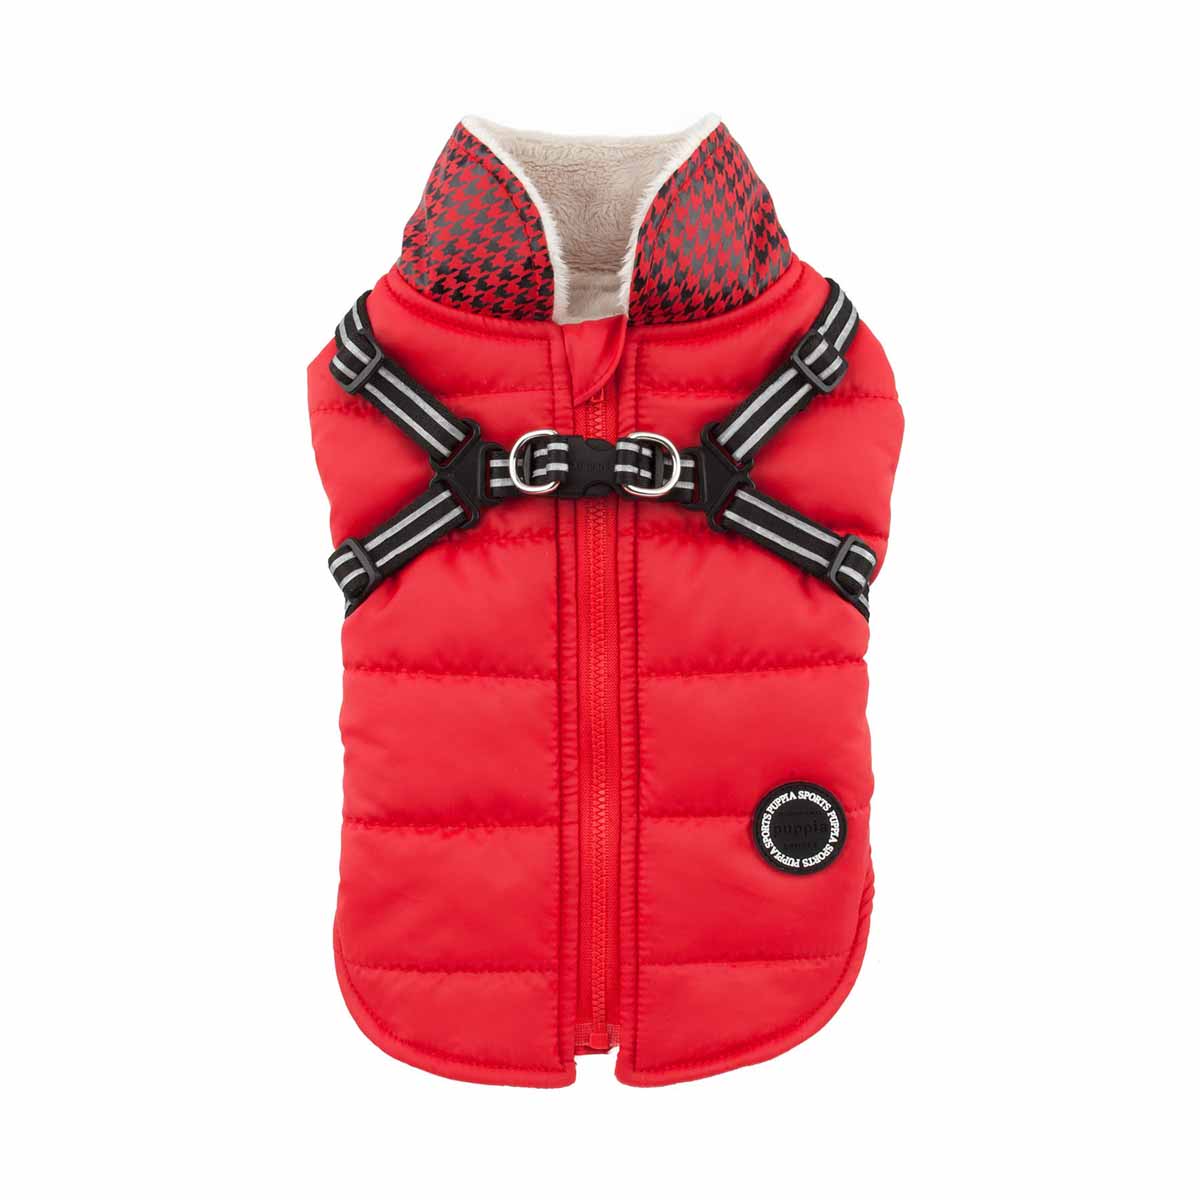 Winter Storm Dog Vest by Puppia - Red | BaxterBoo